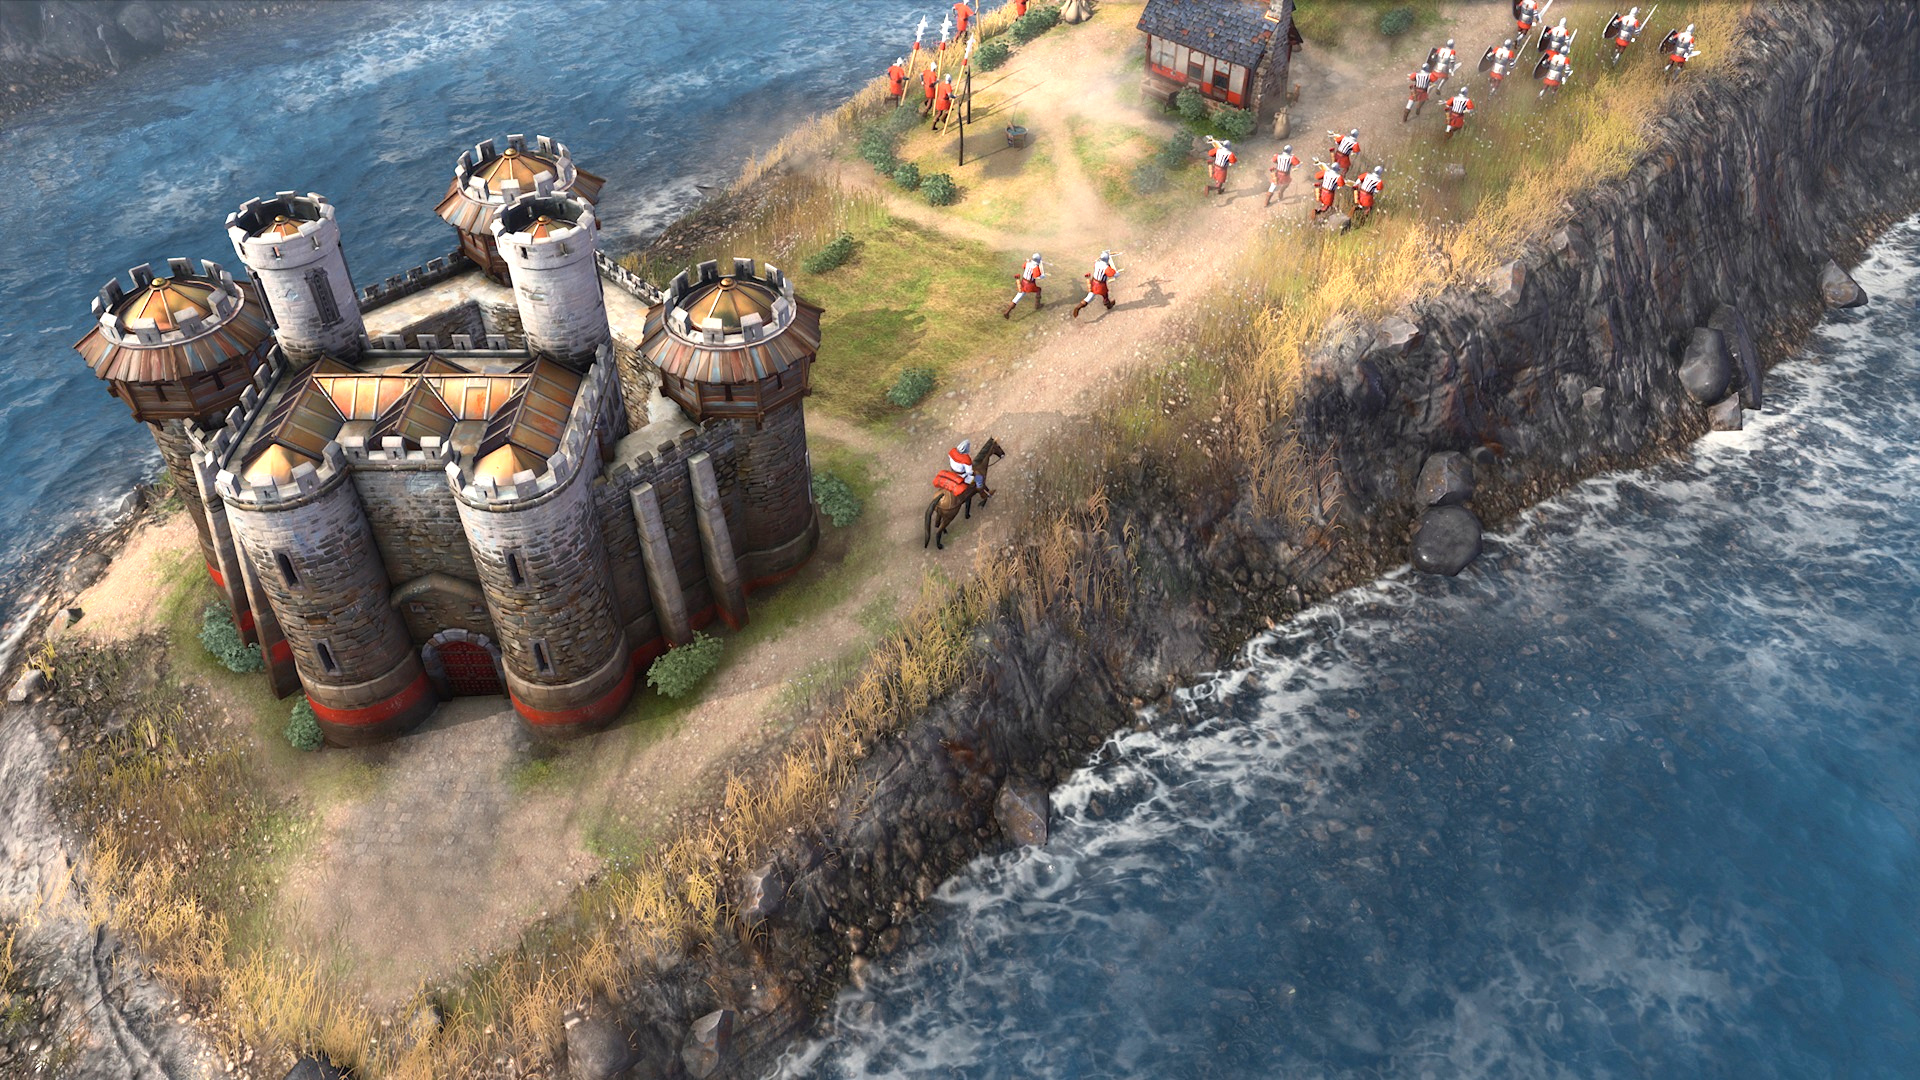 Age of Empires 4 isn’t out yet, but fans are already deciding what DLC they want first